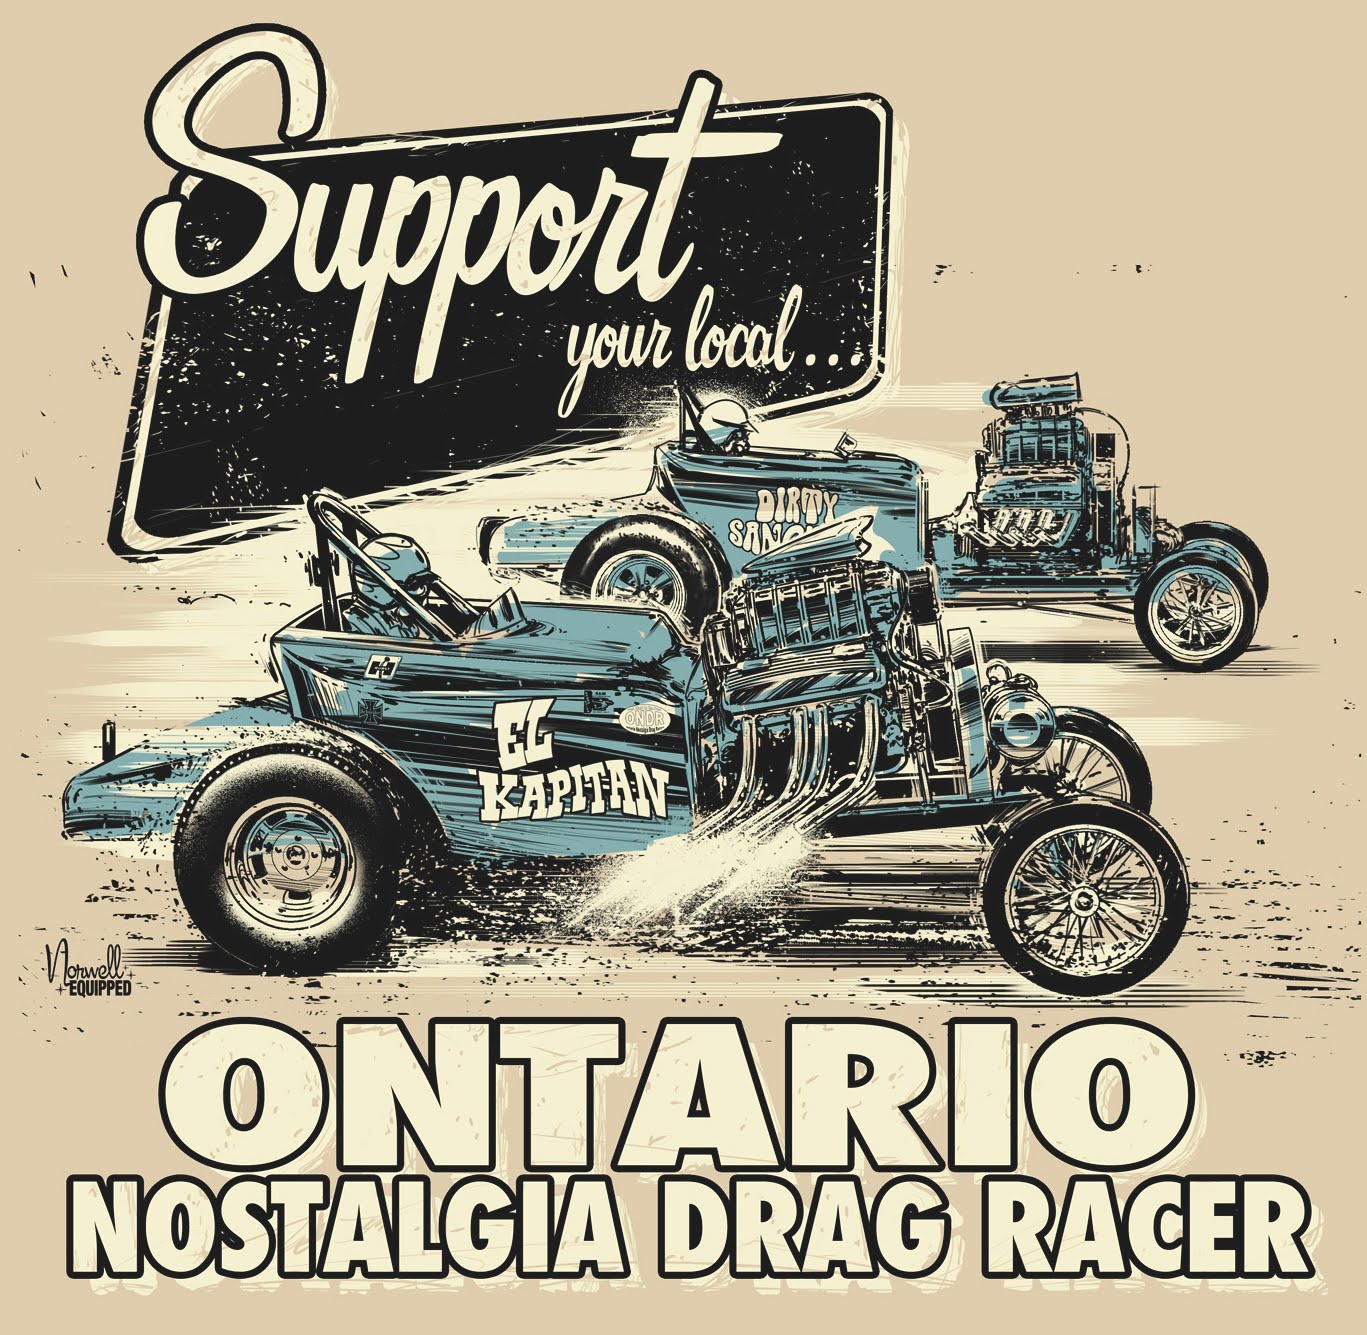 NEW RAGS AND SWAG FOR The Ontario Nostalgia Drag racers. 